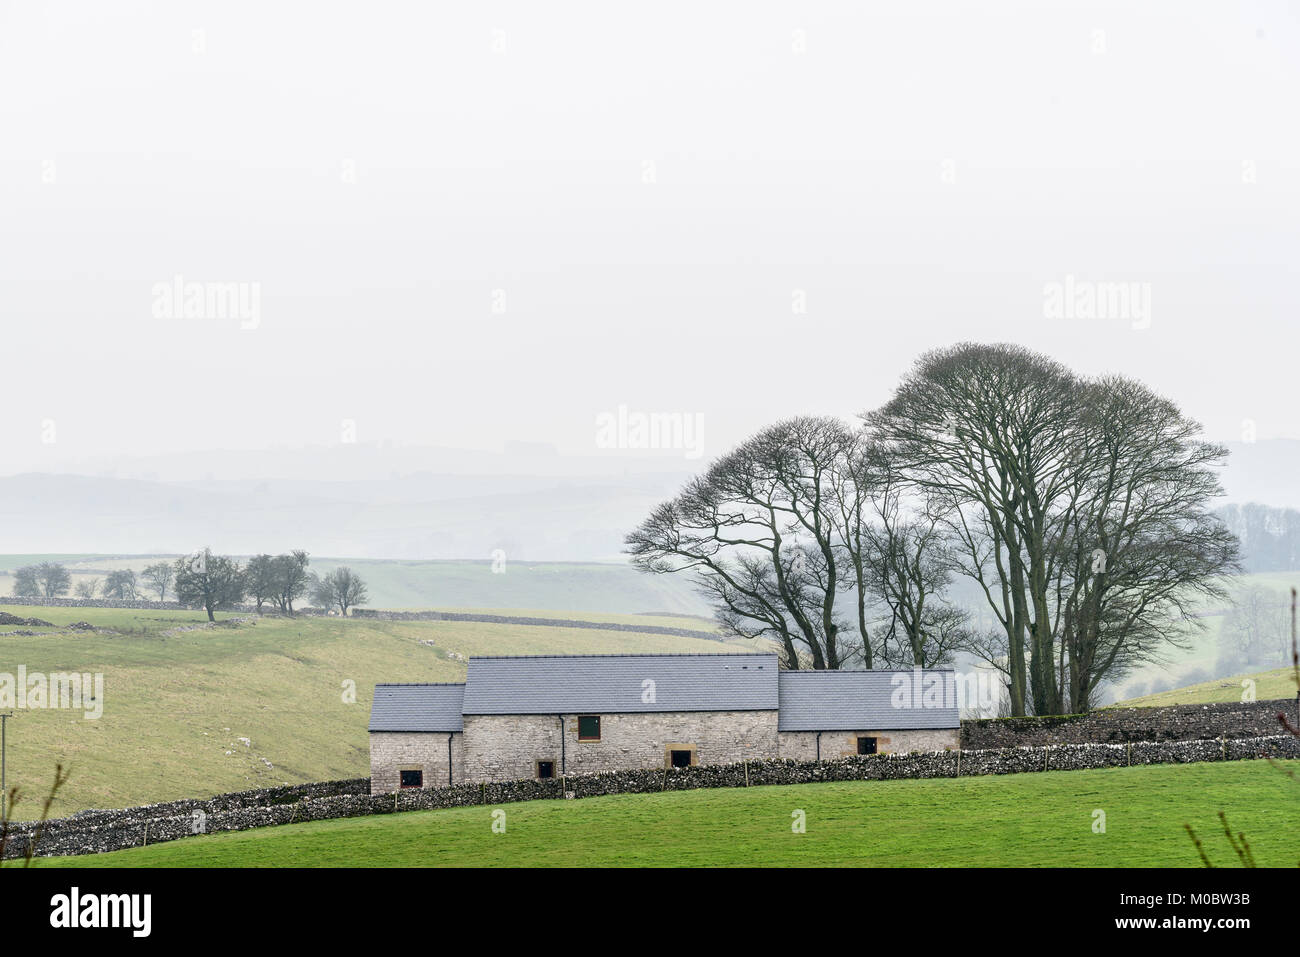 Refurbished farm house as seen from the Tissington trail in mid winter on the Peak district at Alsop moor, Derbyshire, England. Stock Photo